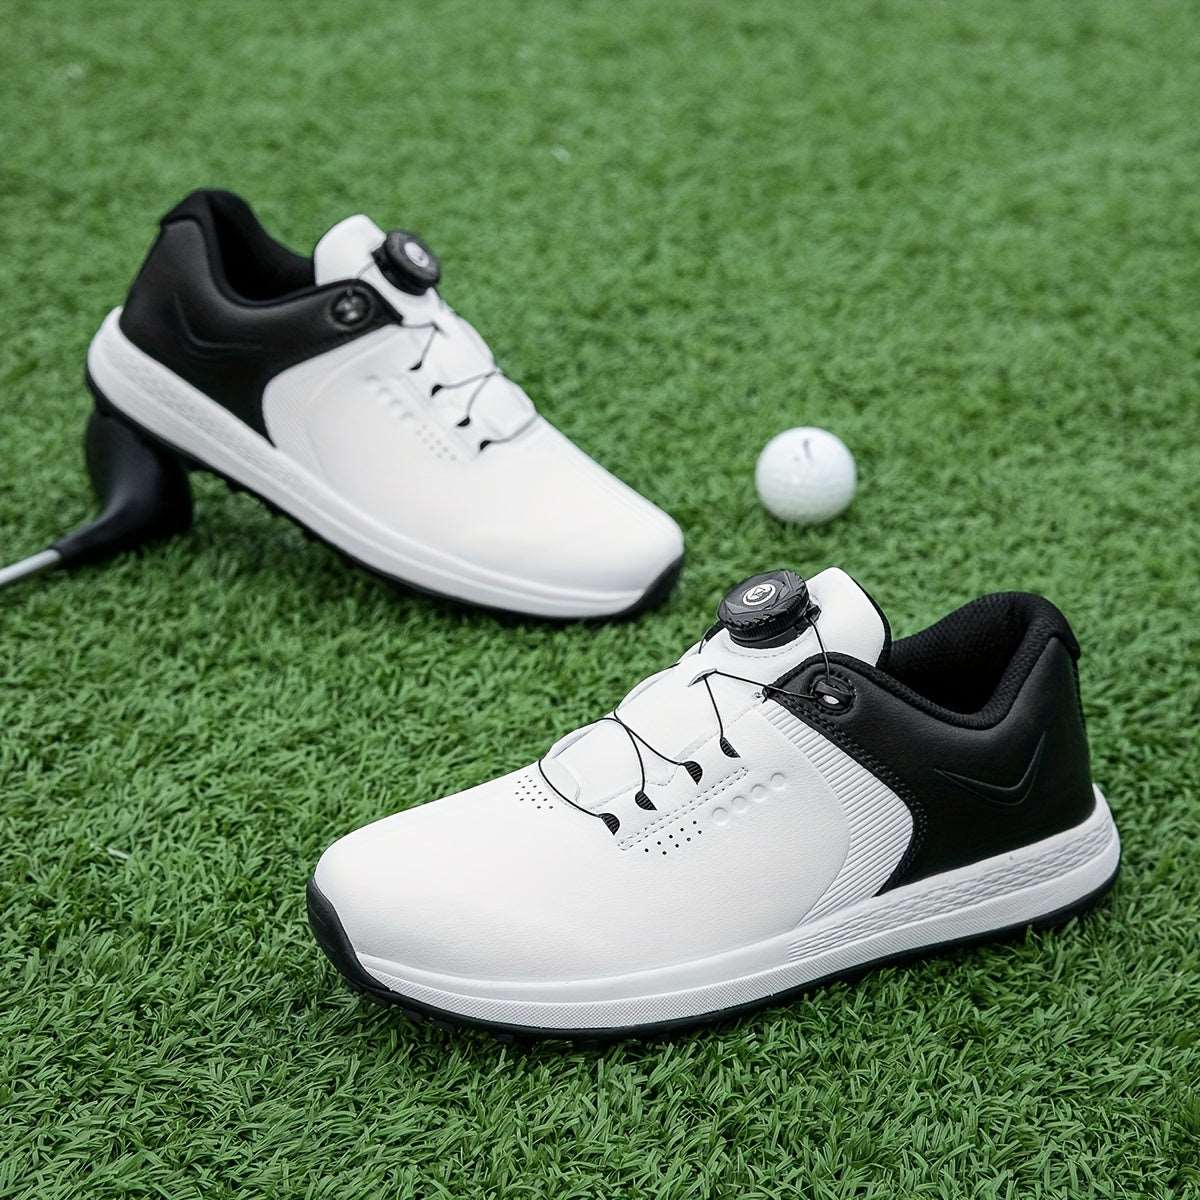 Men's Solid Non-slip Golf Shoes With Rotating Buckle